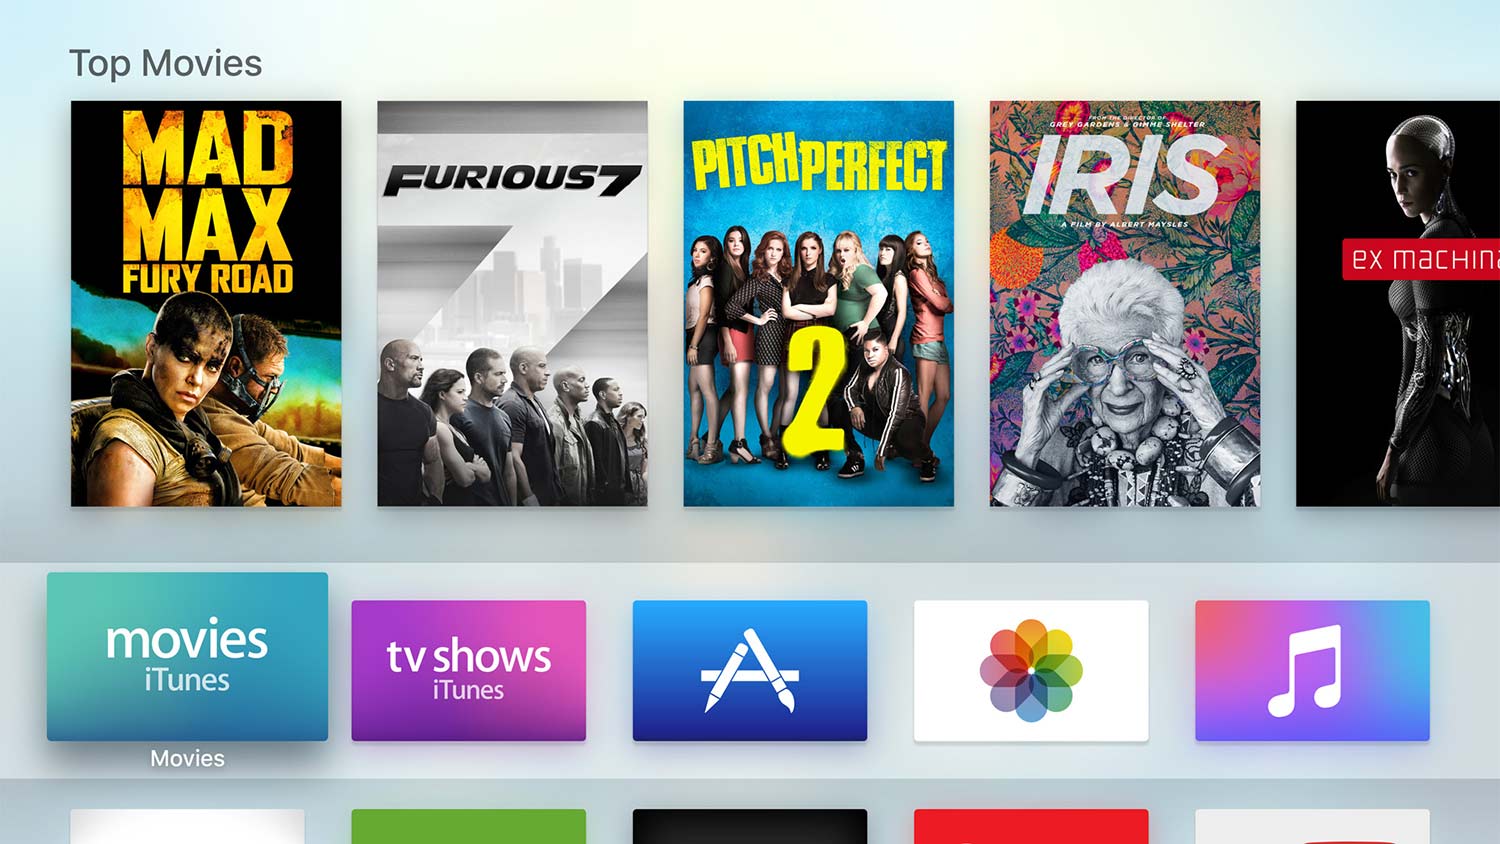 apple tv special event specs pricing detalis 2015 top movies large